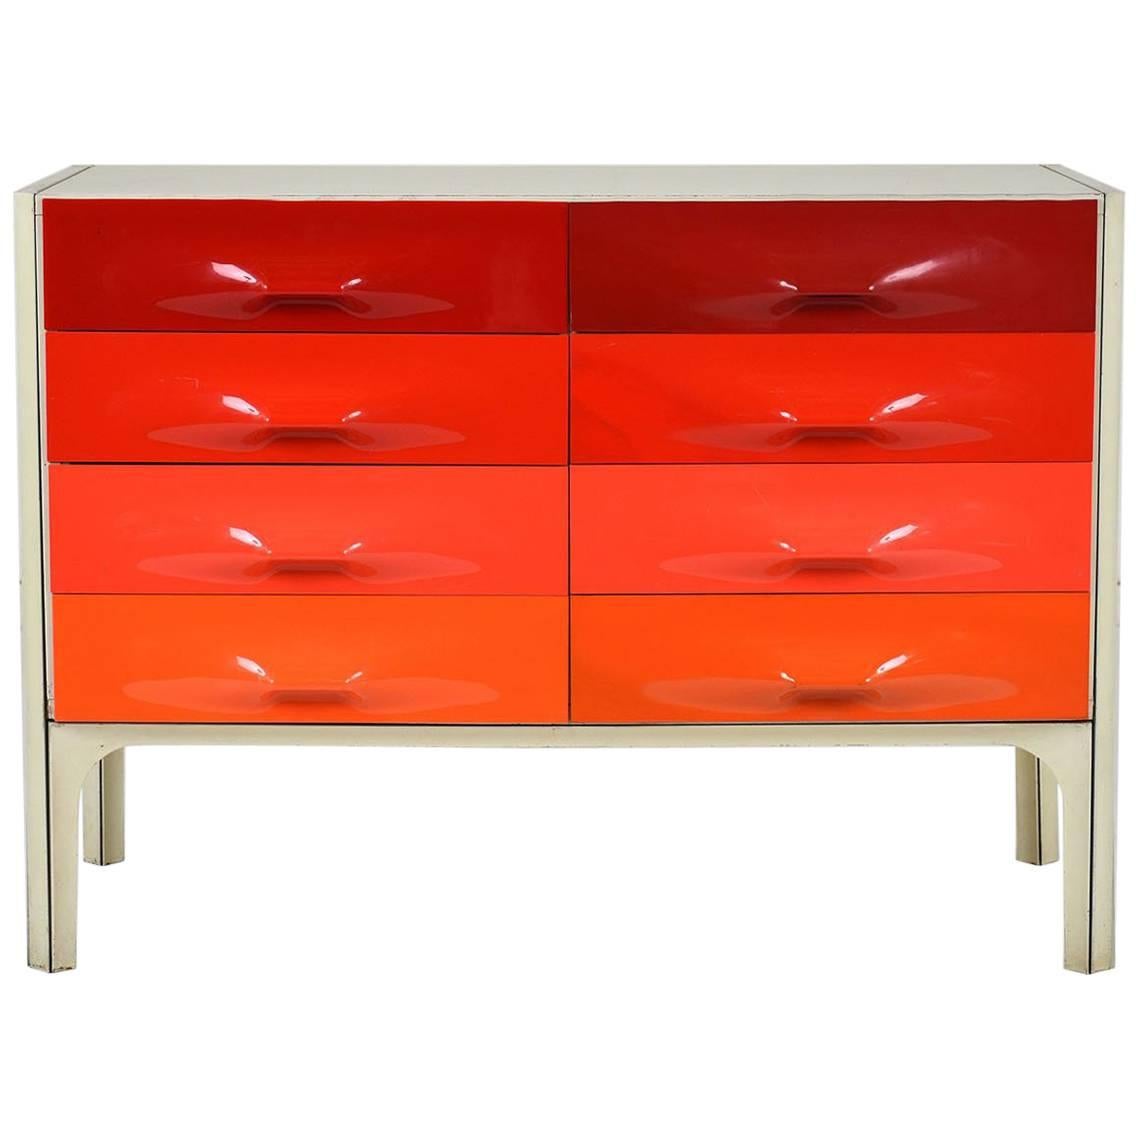 Raymond Loewy DF-2000 Chest of Drawers in Red Tones